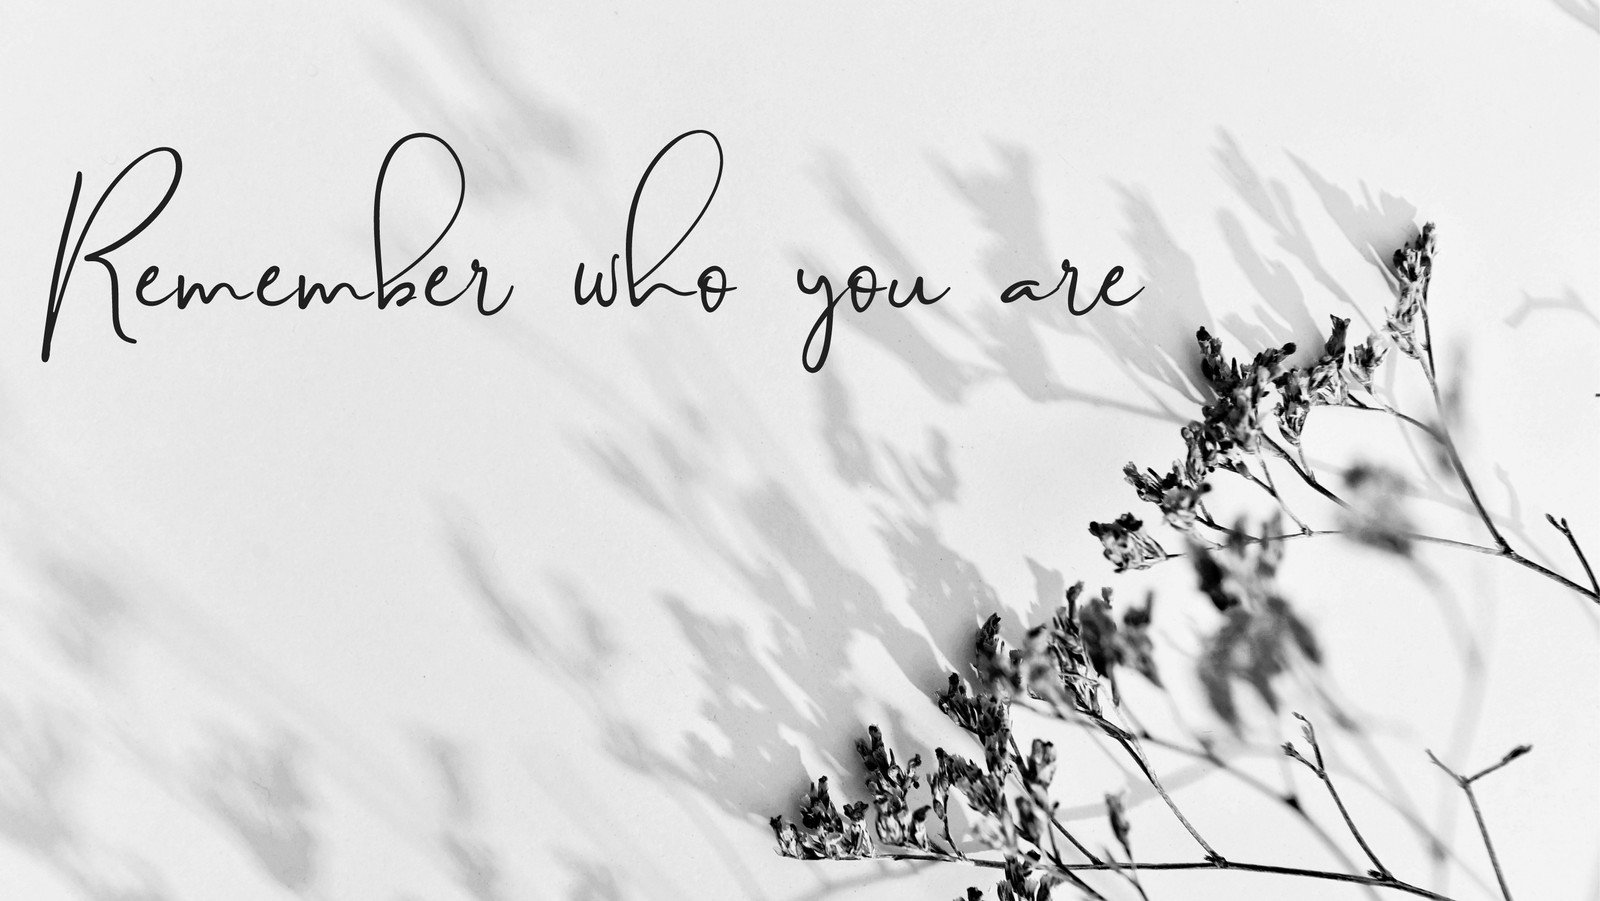 black and white quotes facebook covers